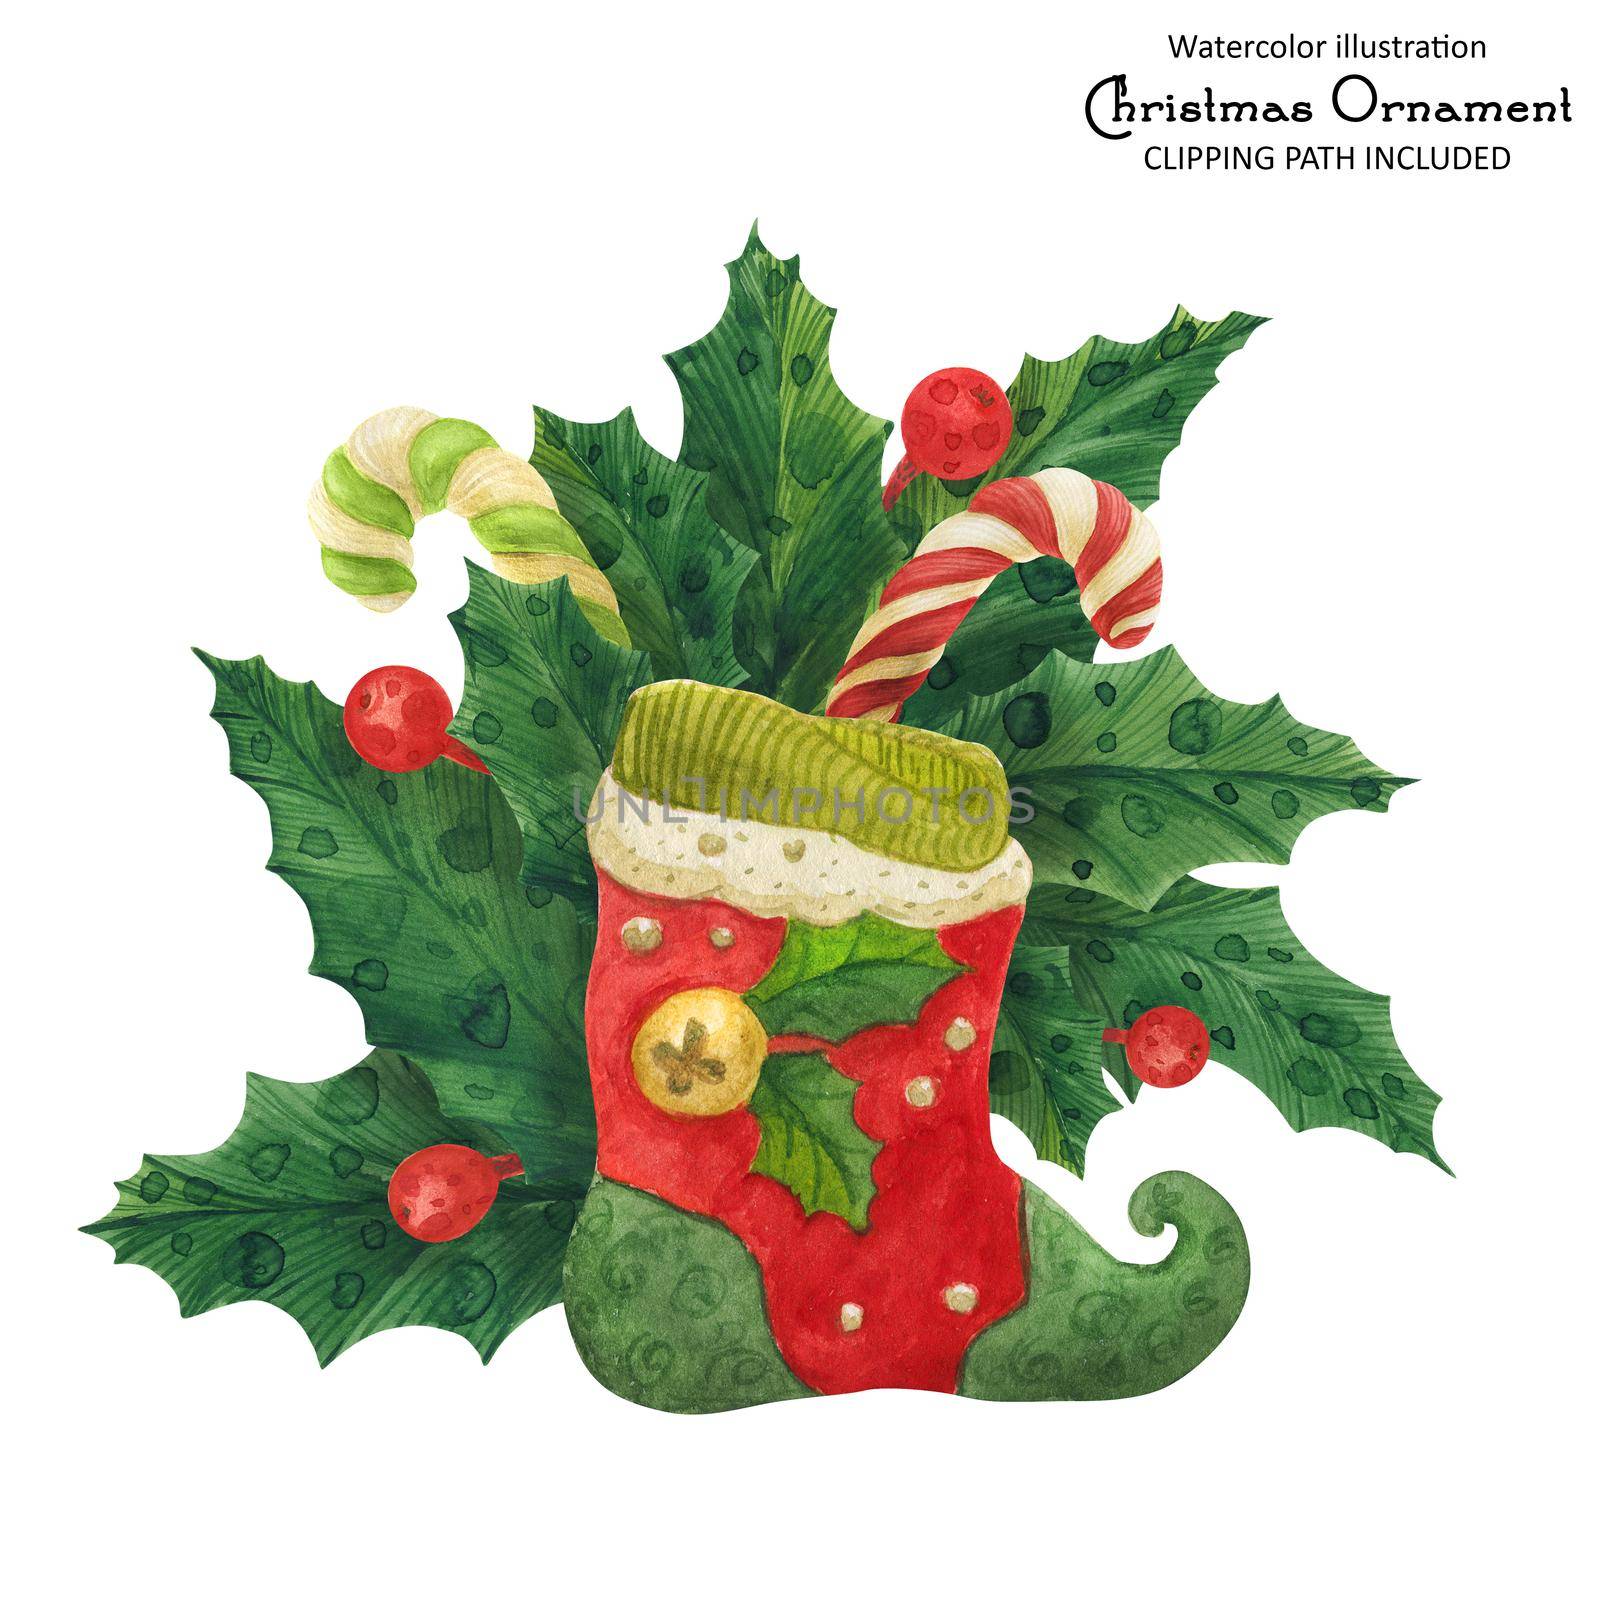 Christmas holly bouquet with elf stocking and candy canes, watercolor illustration by Xeniasnowstorm